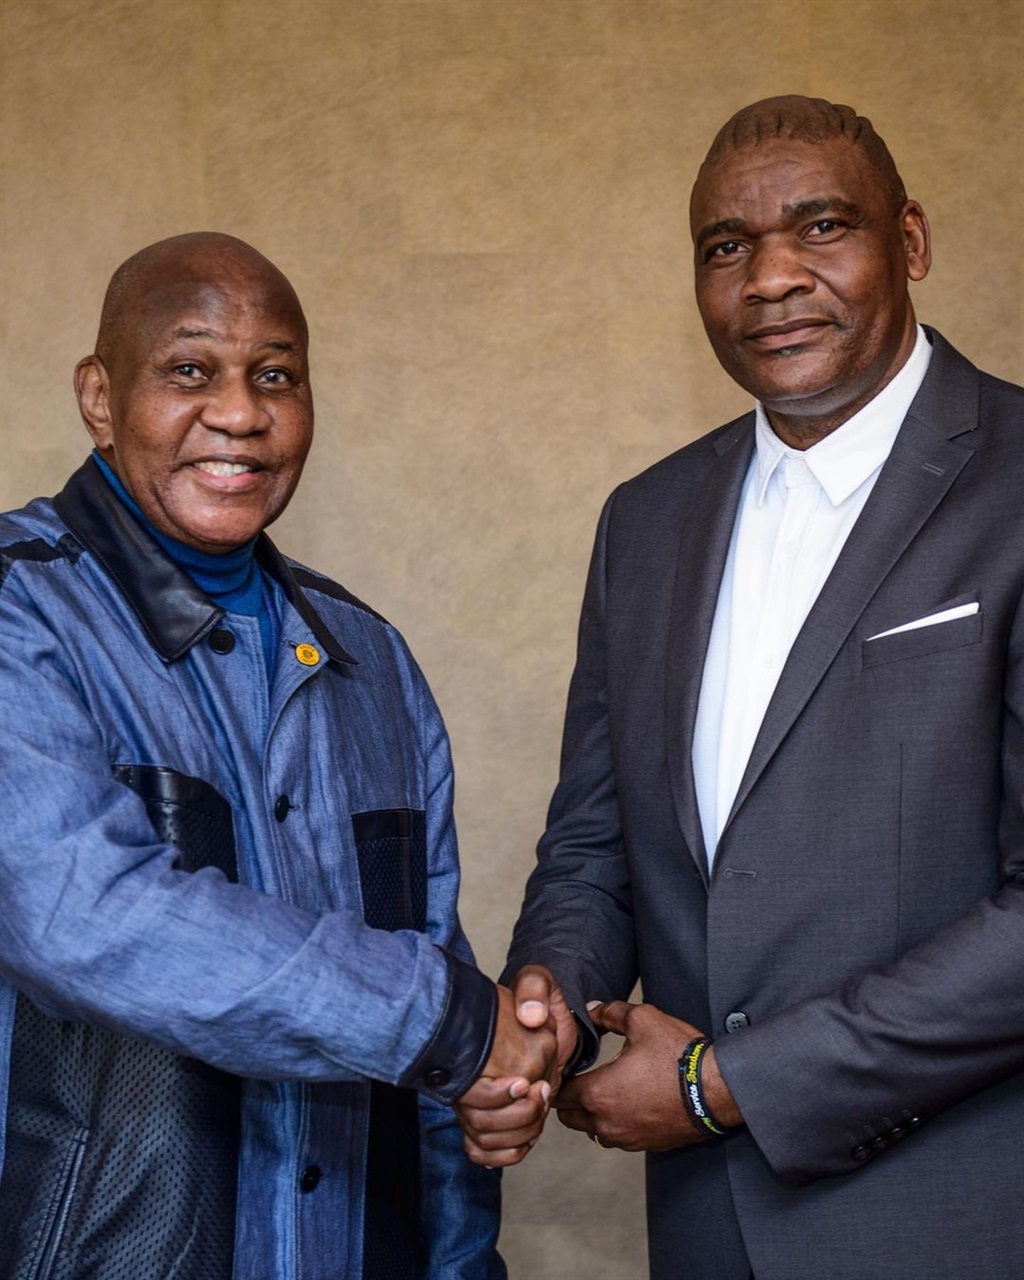 Twitter users have made Molefi Ntseki a trending topic after Kaizer Chiefs announced him as their new head coach.